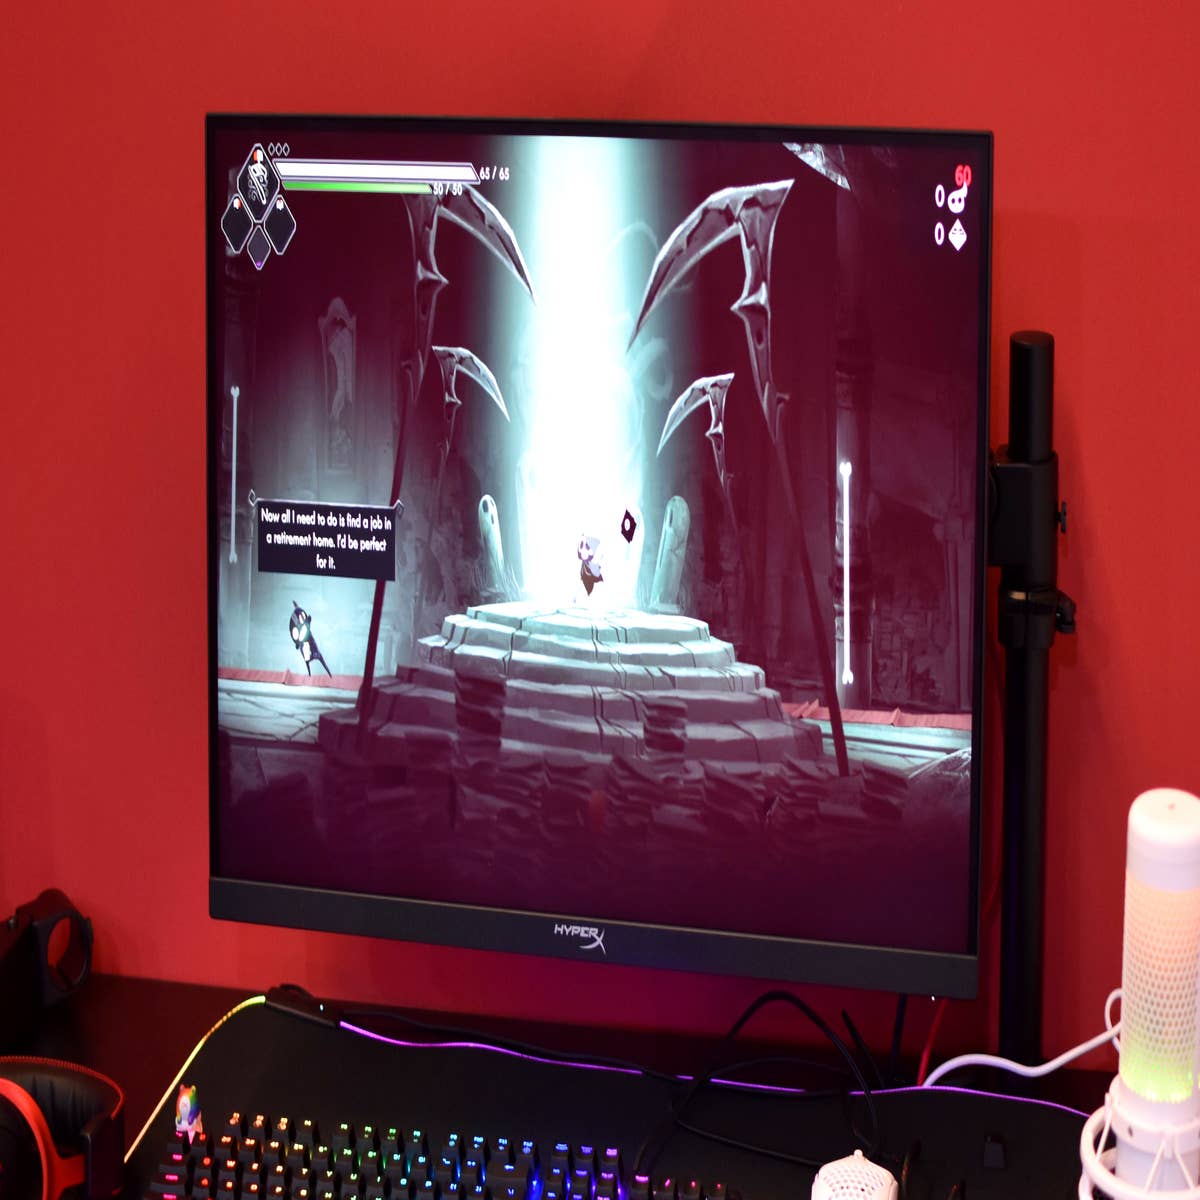 HyperX's first gaming monitors are competent screens perched on